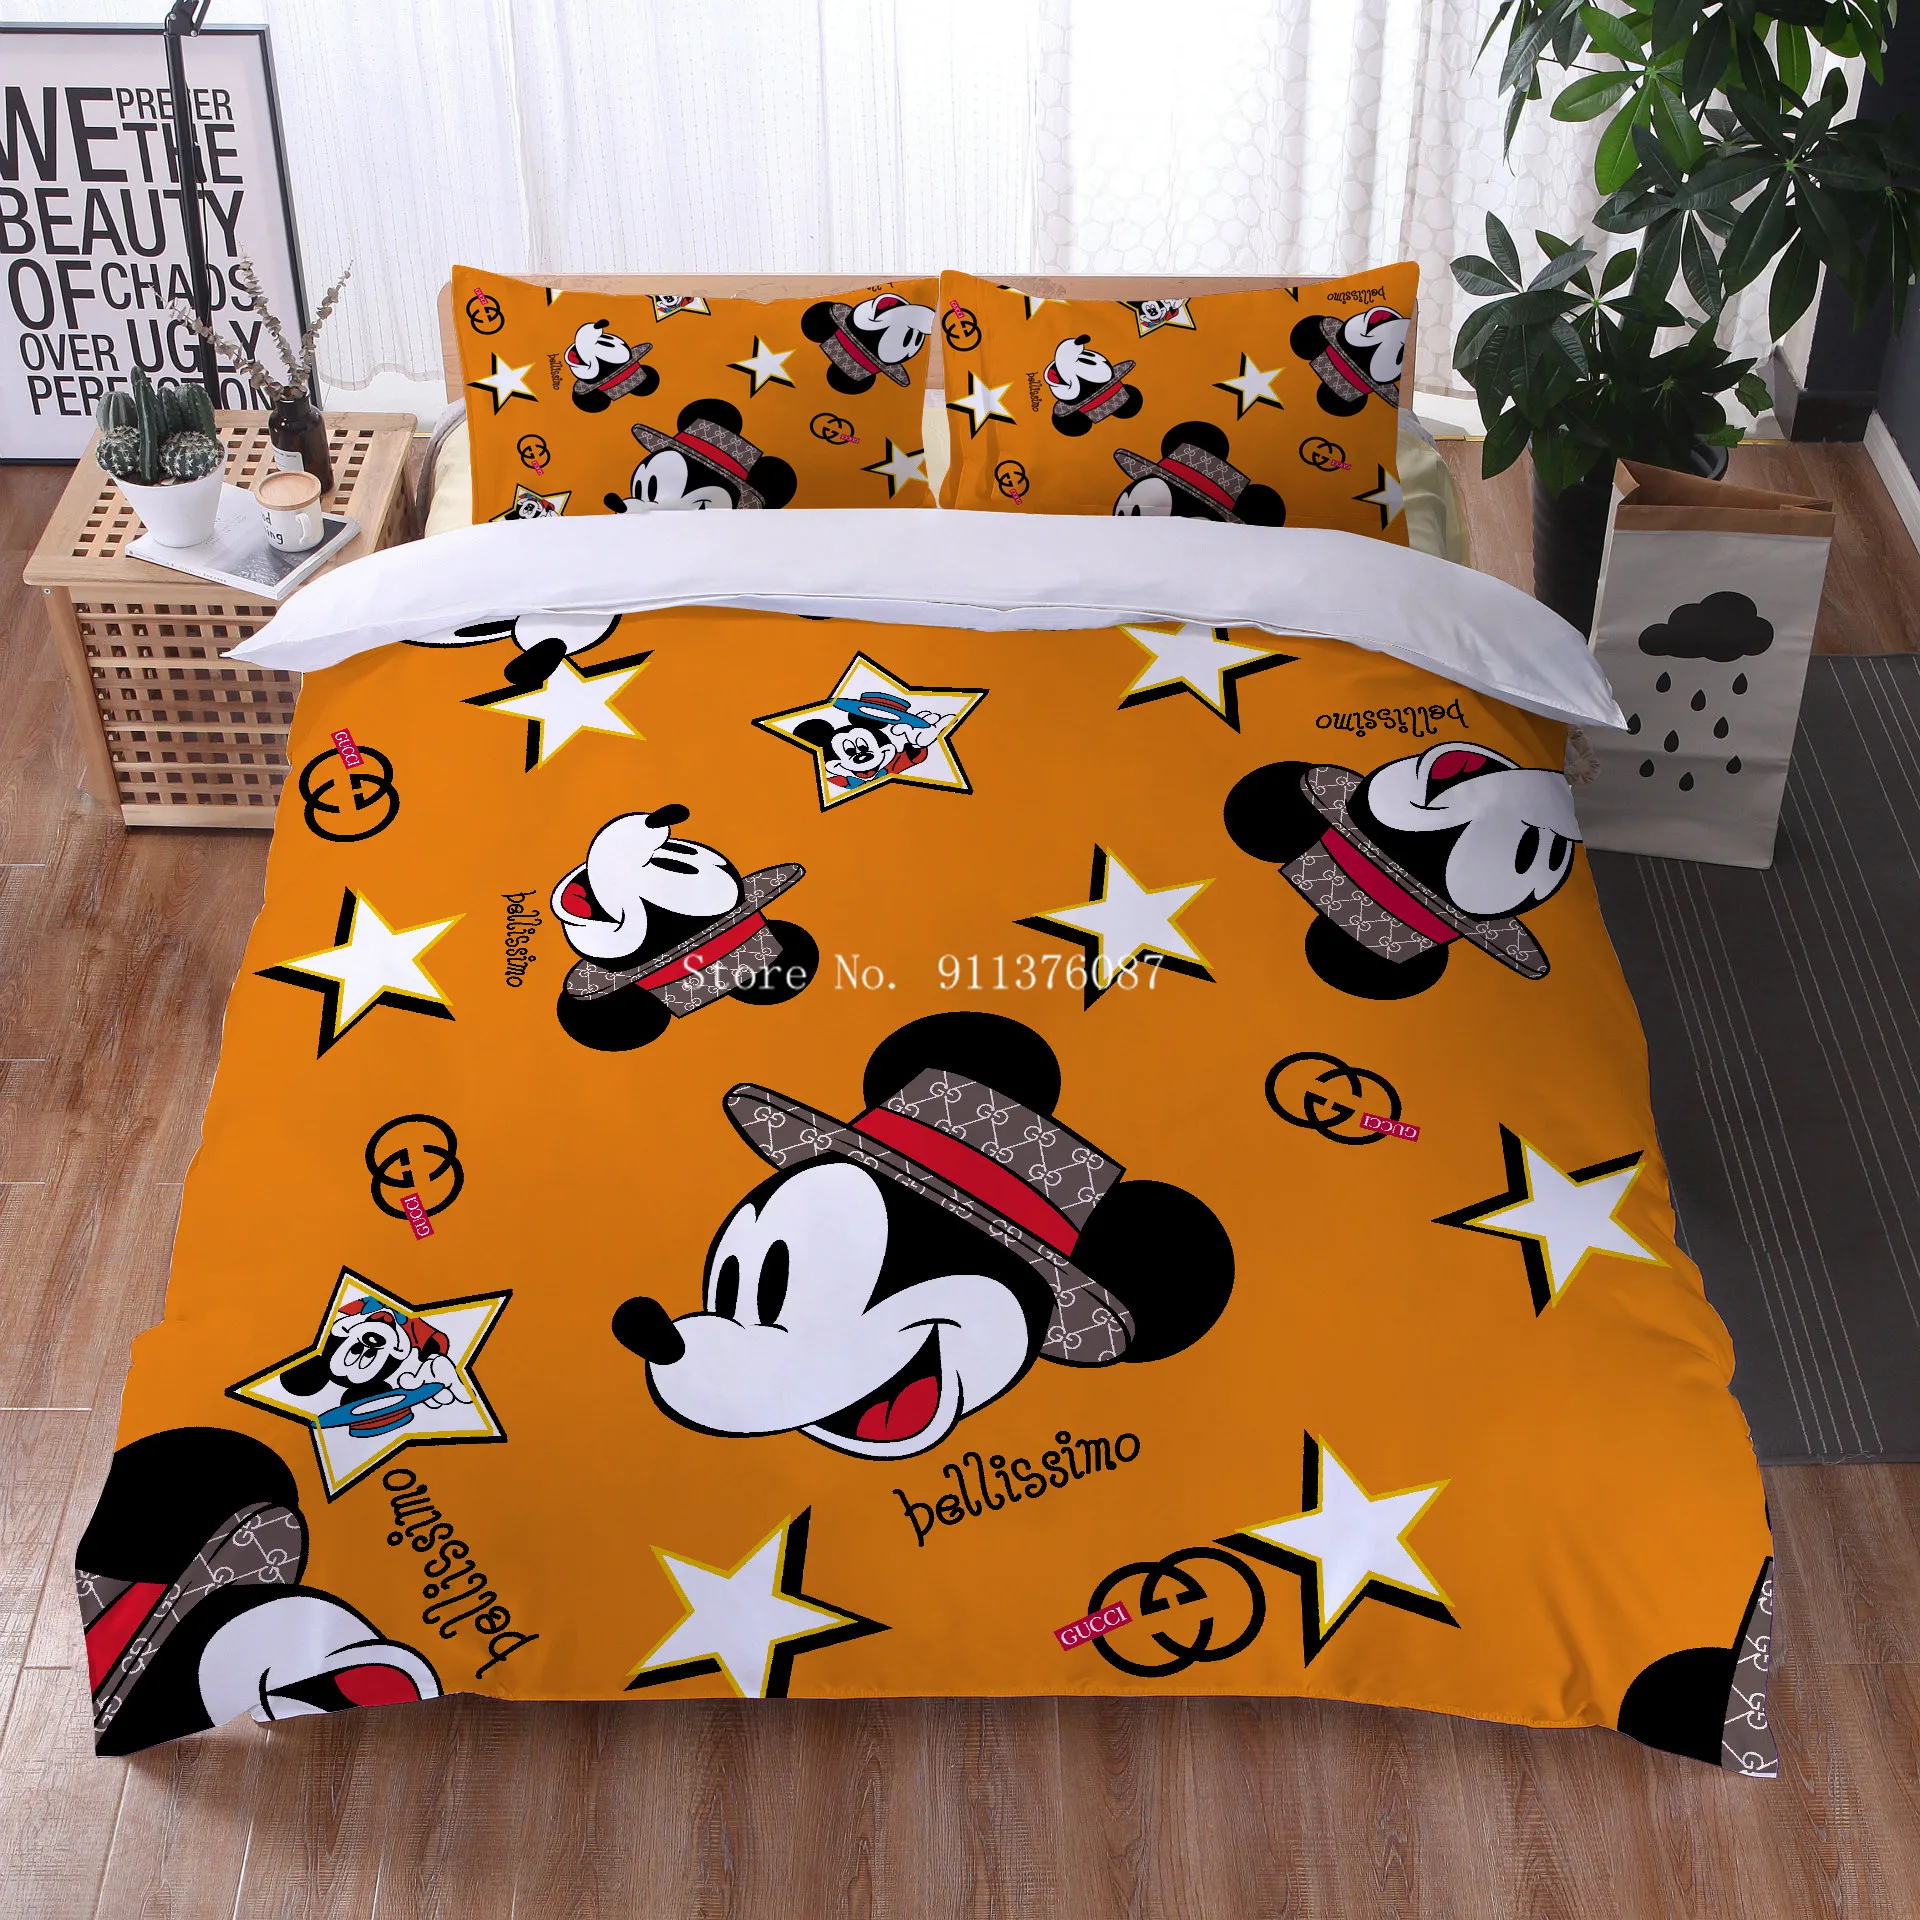 Mickey Mouse Gucci bedding set